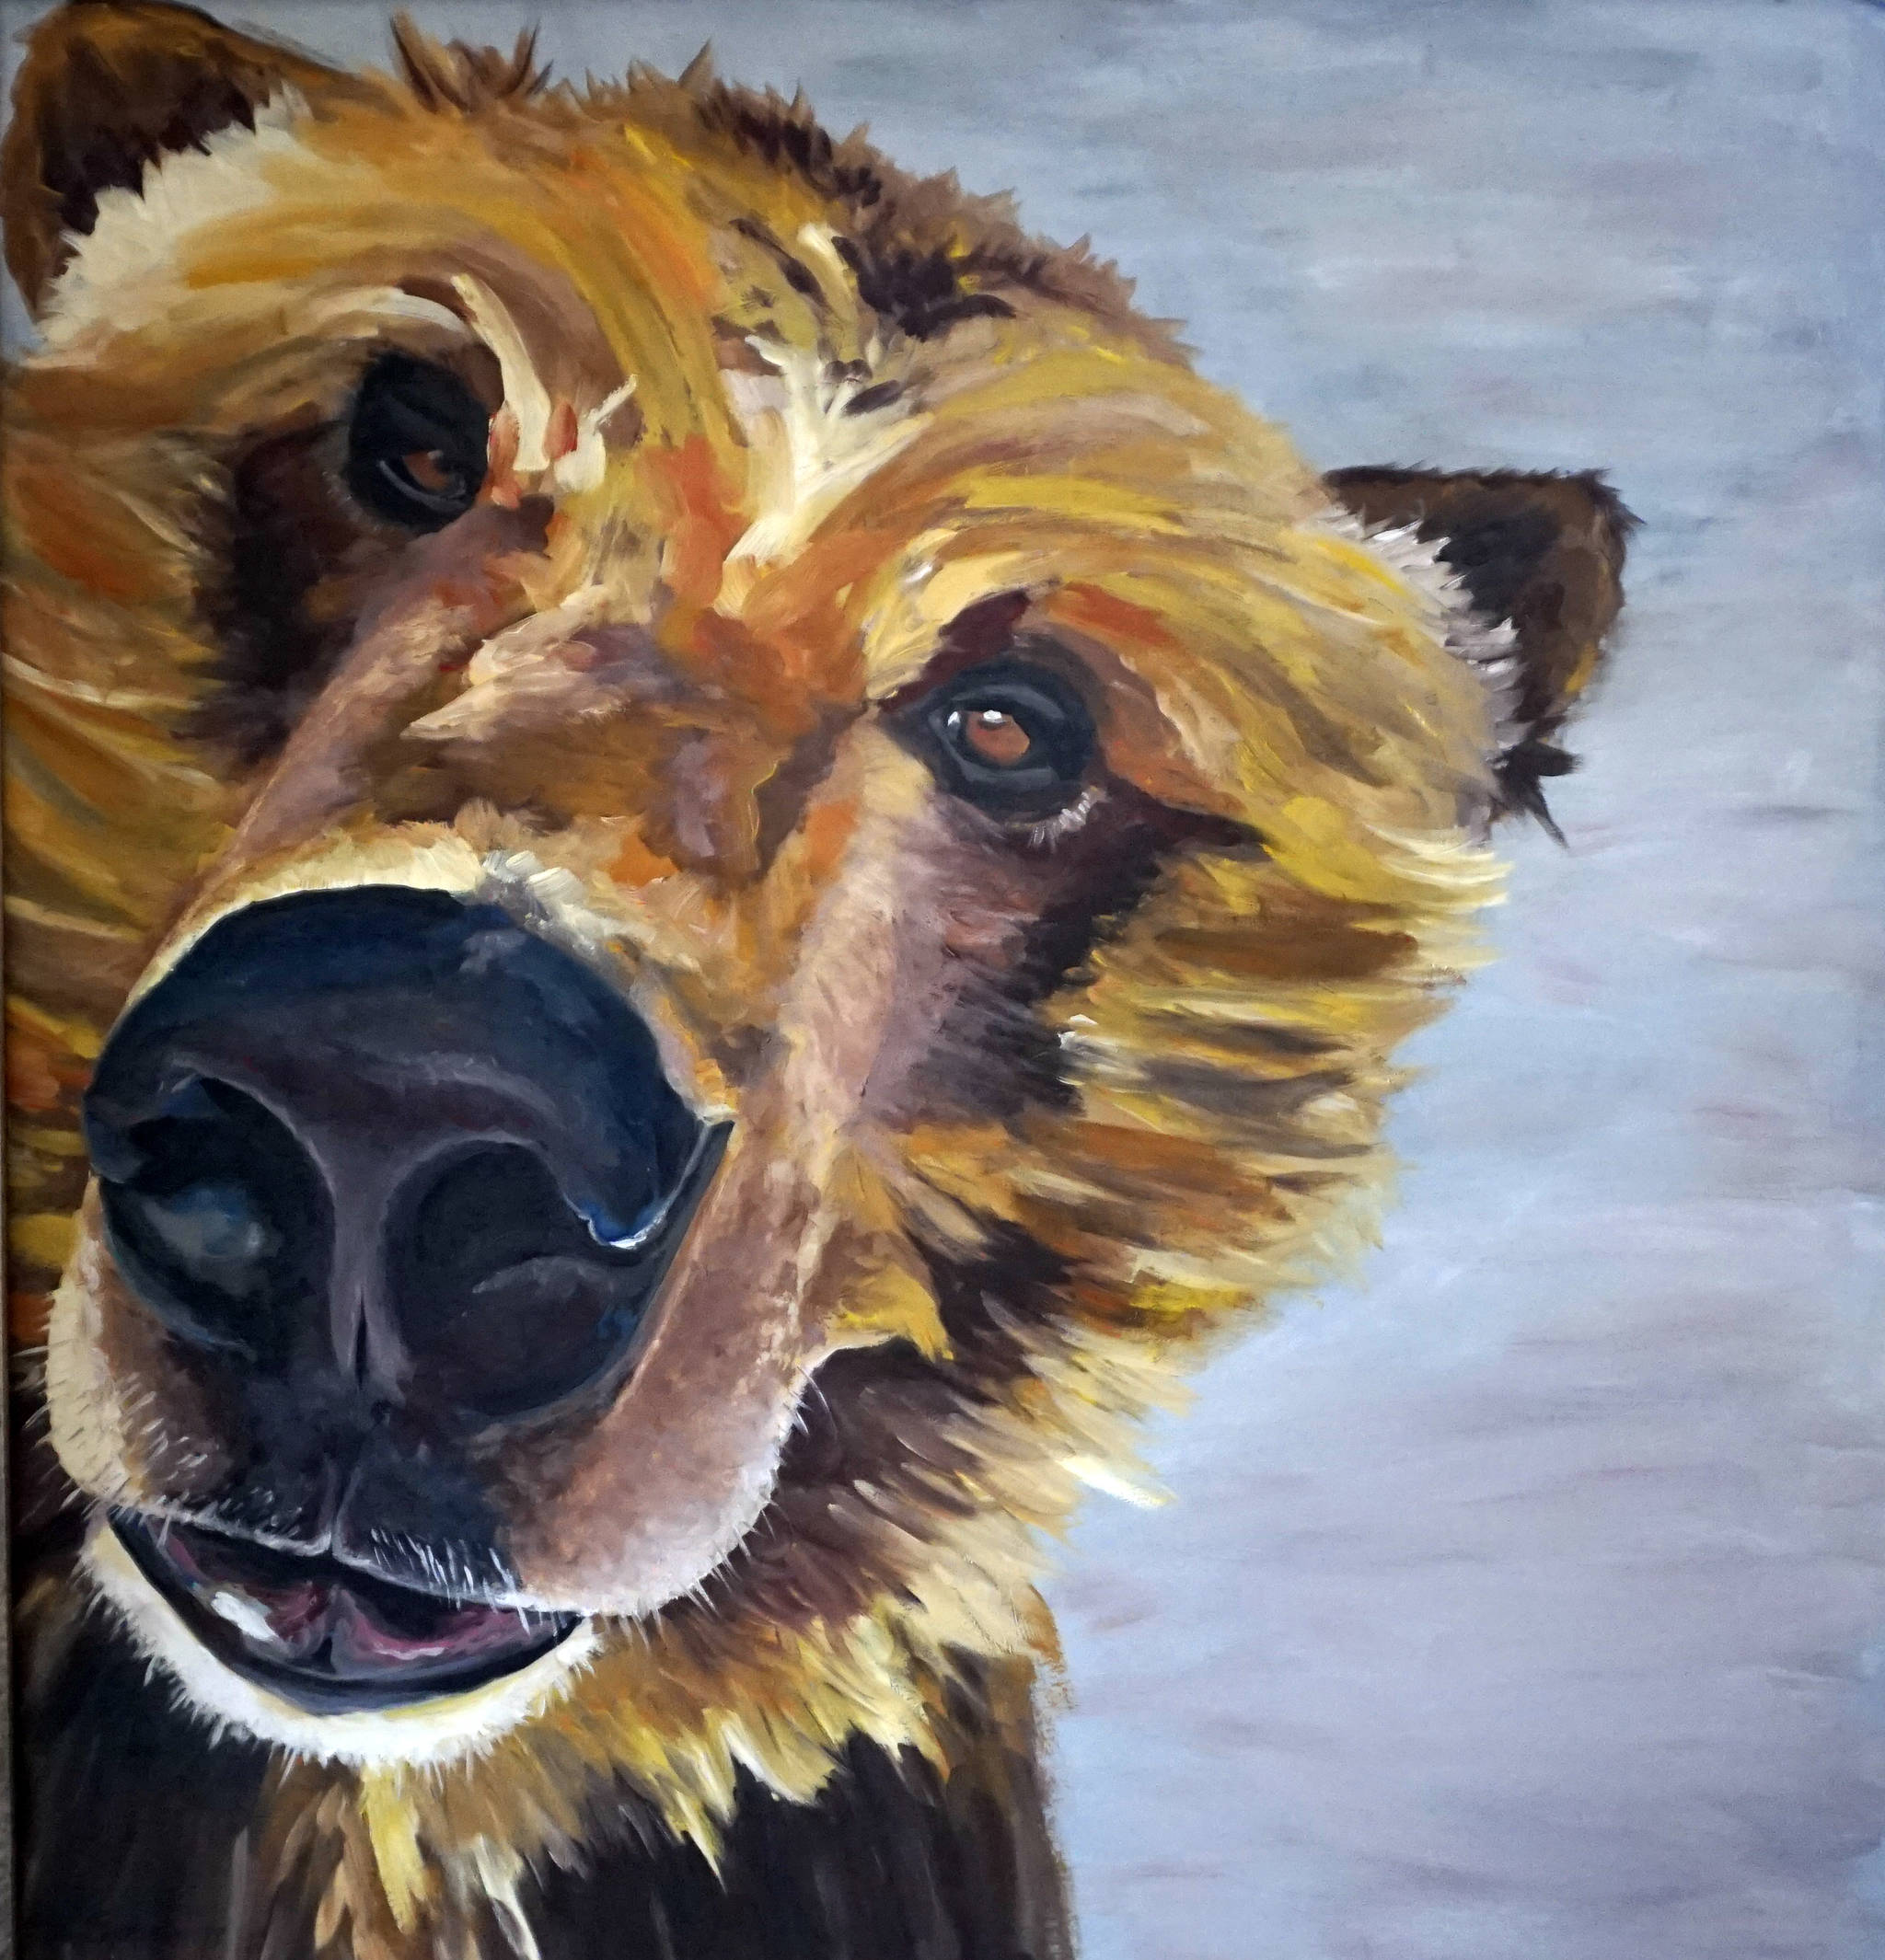 “Bear Puppy,” one of Britni Siekaniec’s paintings in her show, “Salt,” at Grace Ridge Brewery. The show opened April 6, 2018, in Homer, Alaska. (Photo by Michael Armstrong, Homer News)